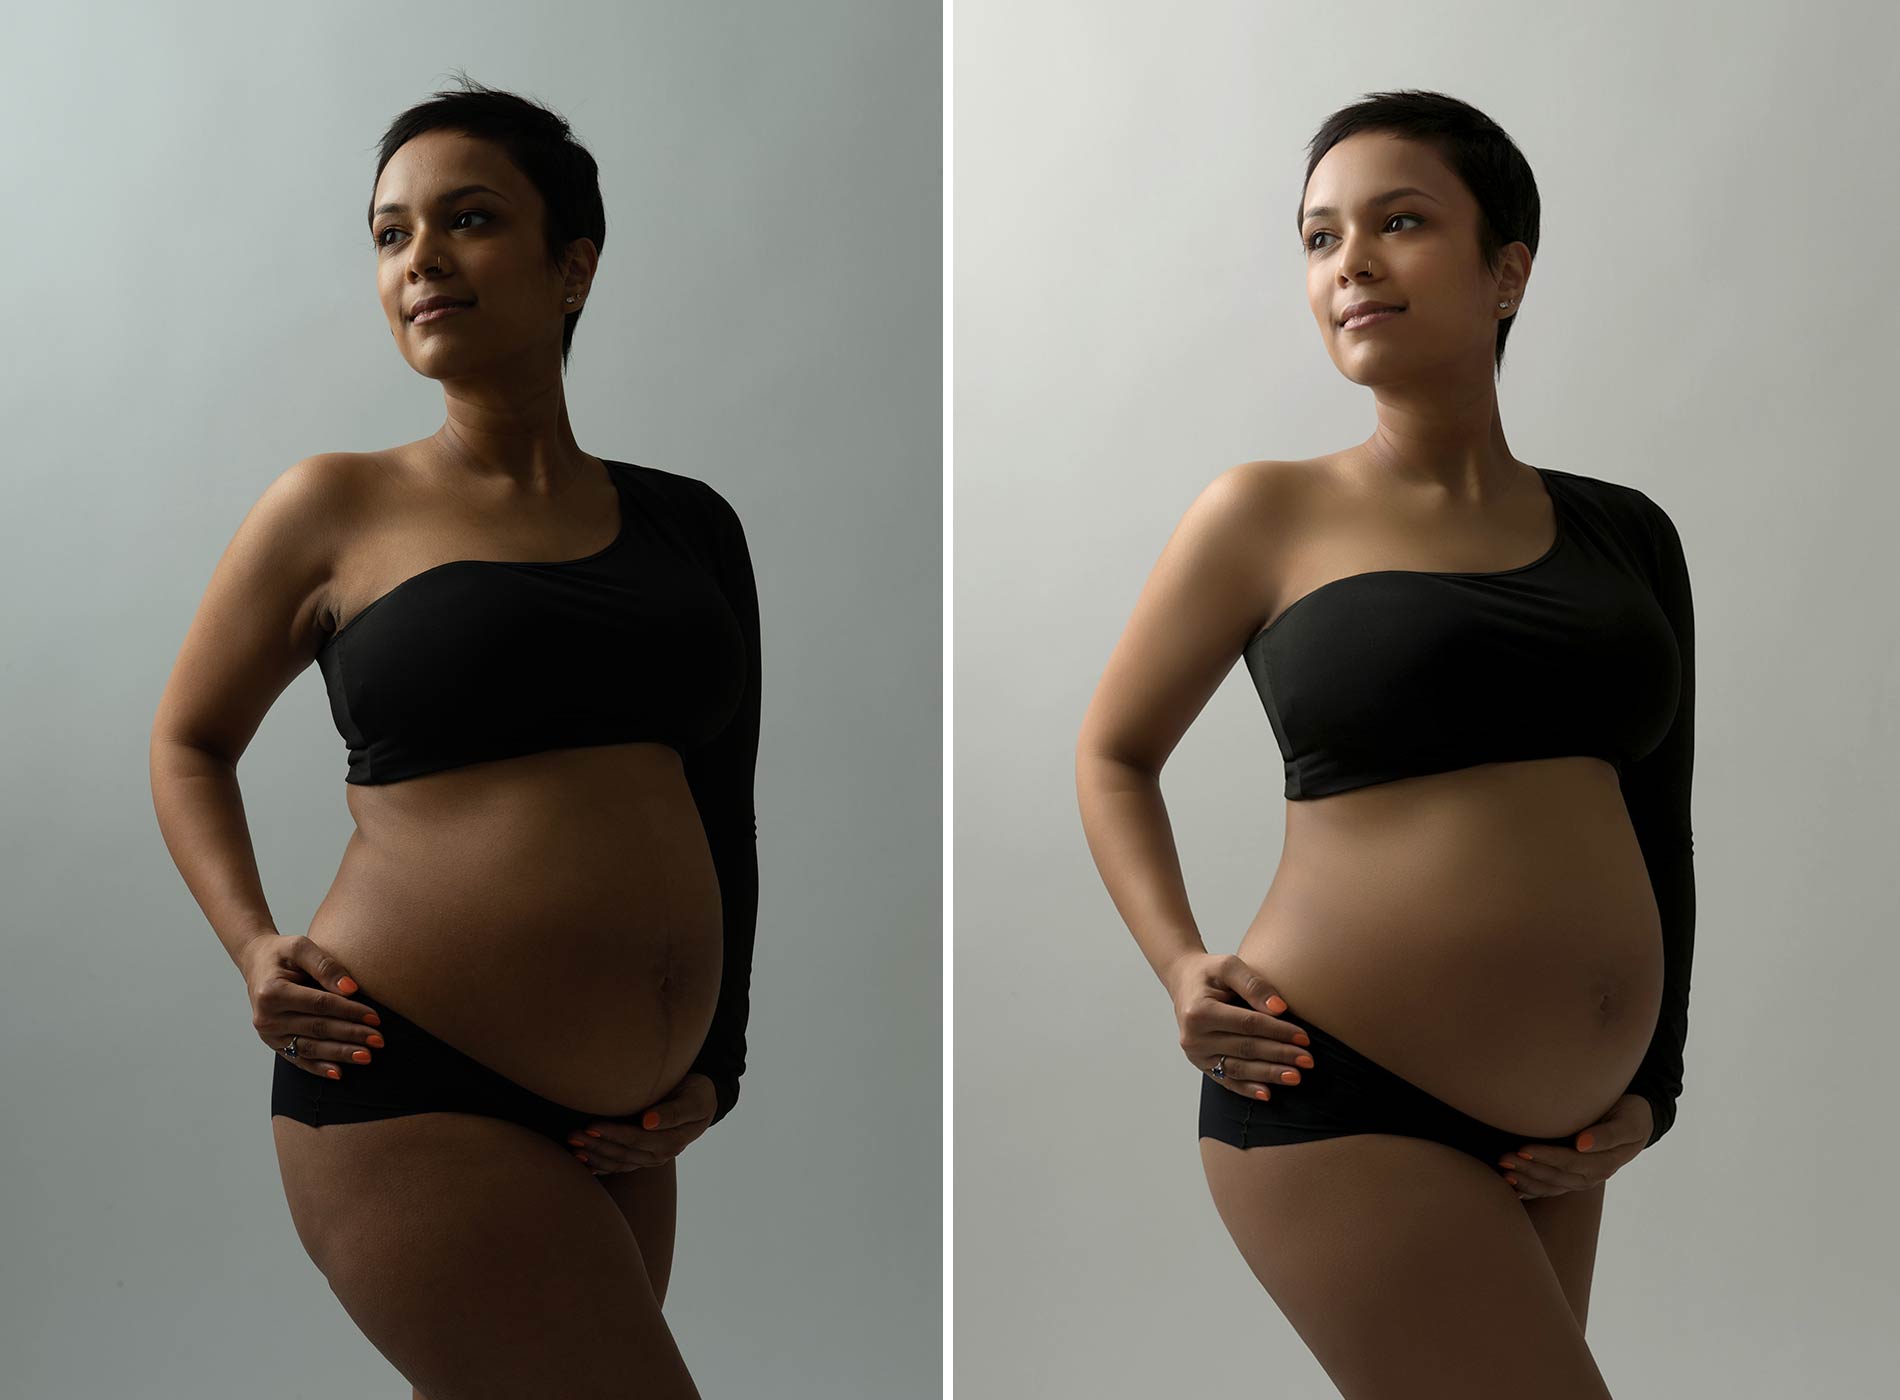 Pregnant woman wearing a crop top